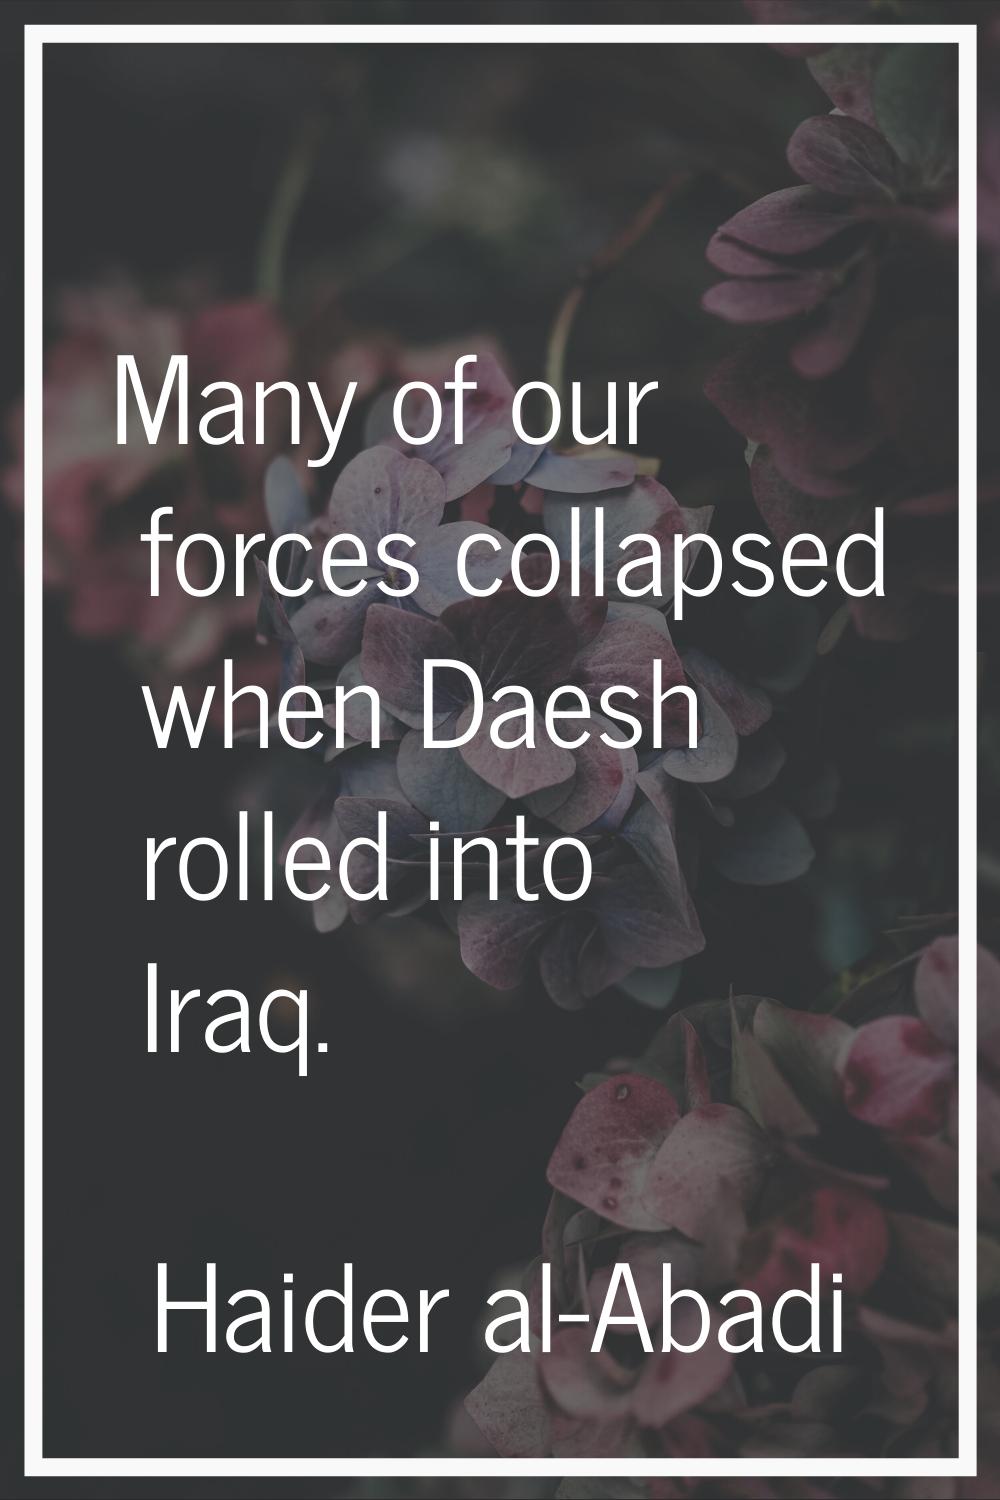 Many of our forces collapsed when Daesh rolled into Iraq.